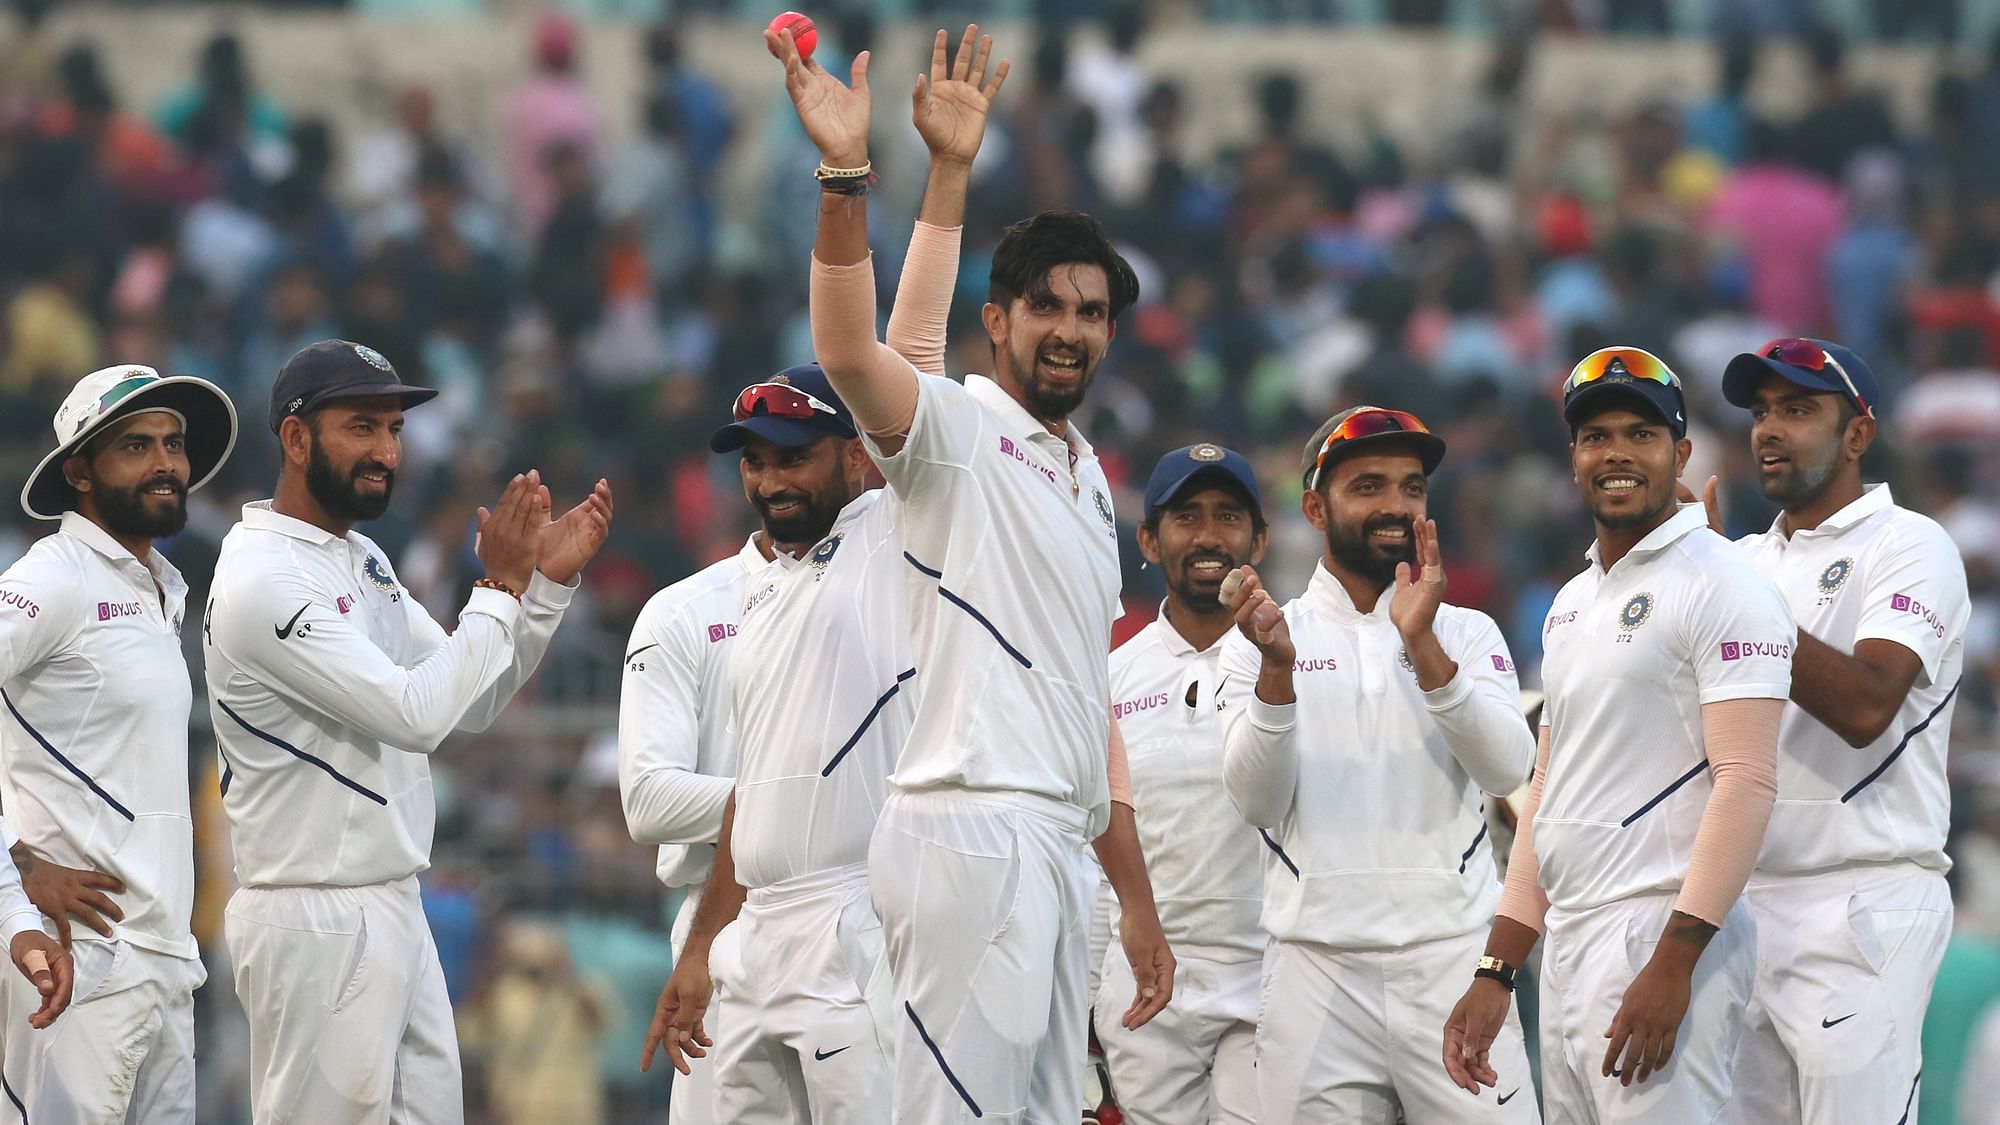 After a long wait of 12 years, Ishant finally got a five-wicket haul (5/22) at home.